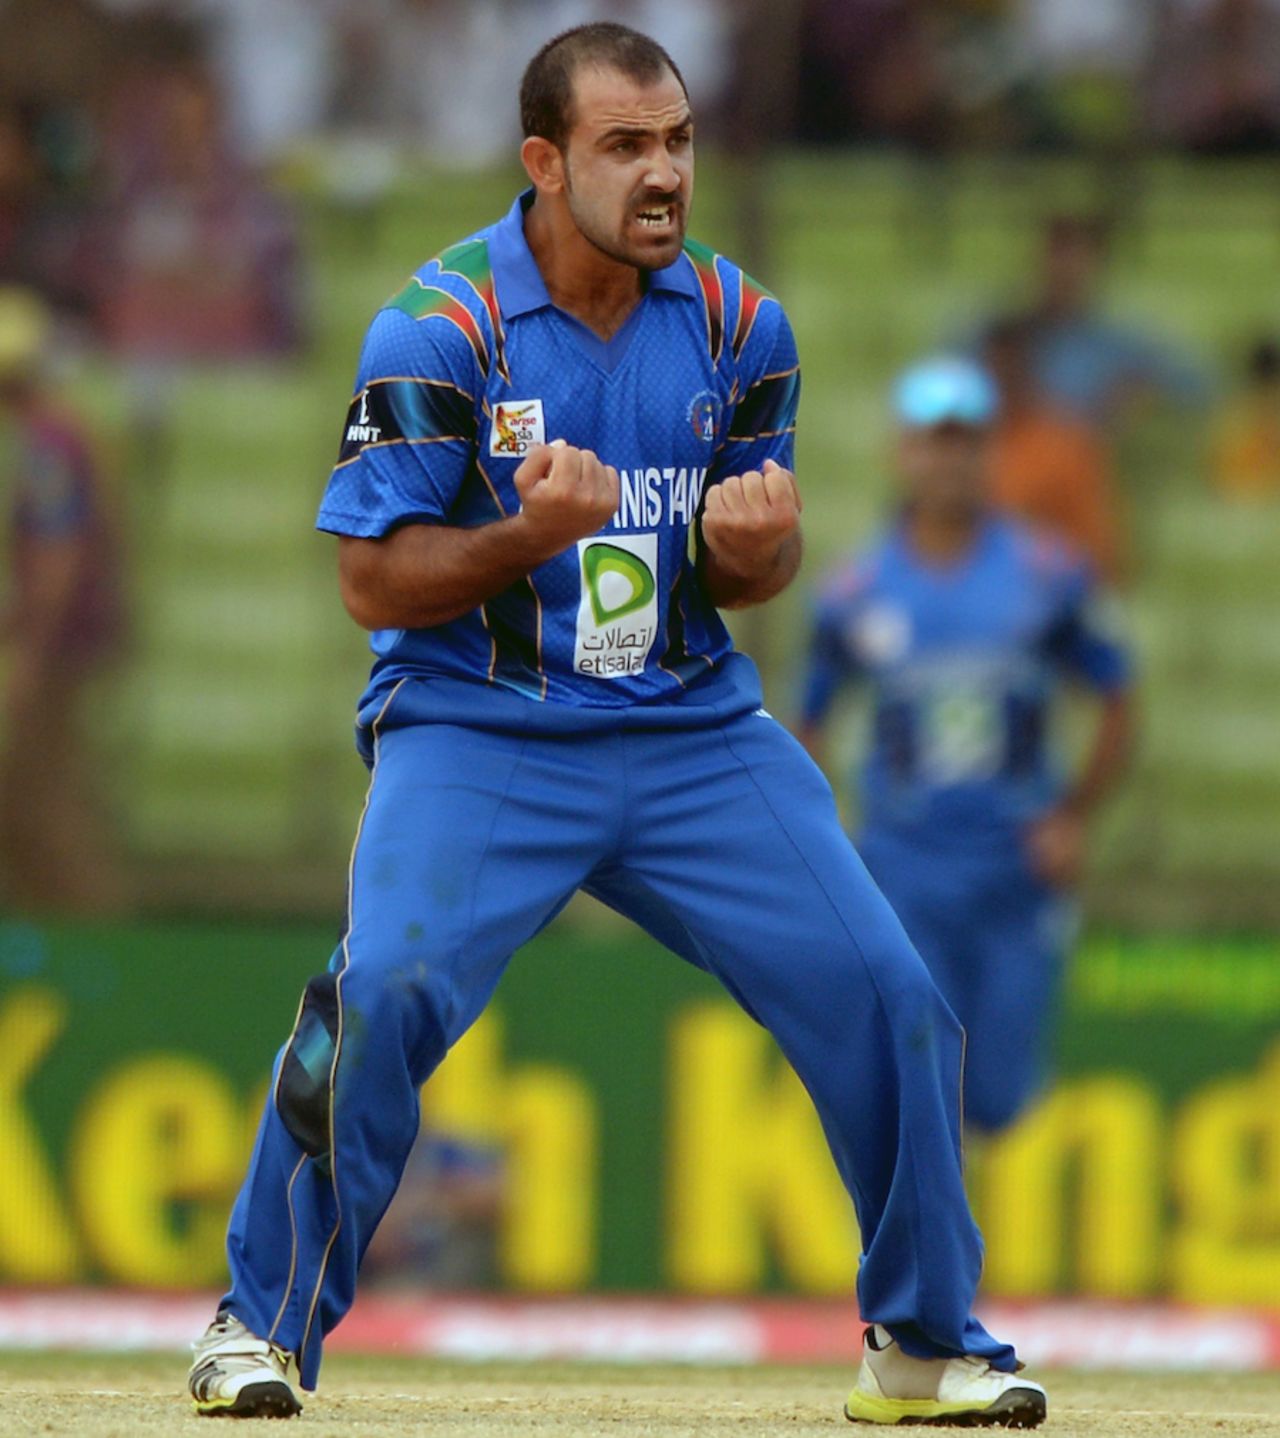 Samiullah Shenwari is pumped after picking up his second wicket, Afghanistan v Pakistan, Asia Cup 2014, Fatullah, February 27, 2014